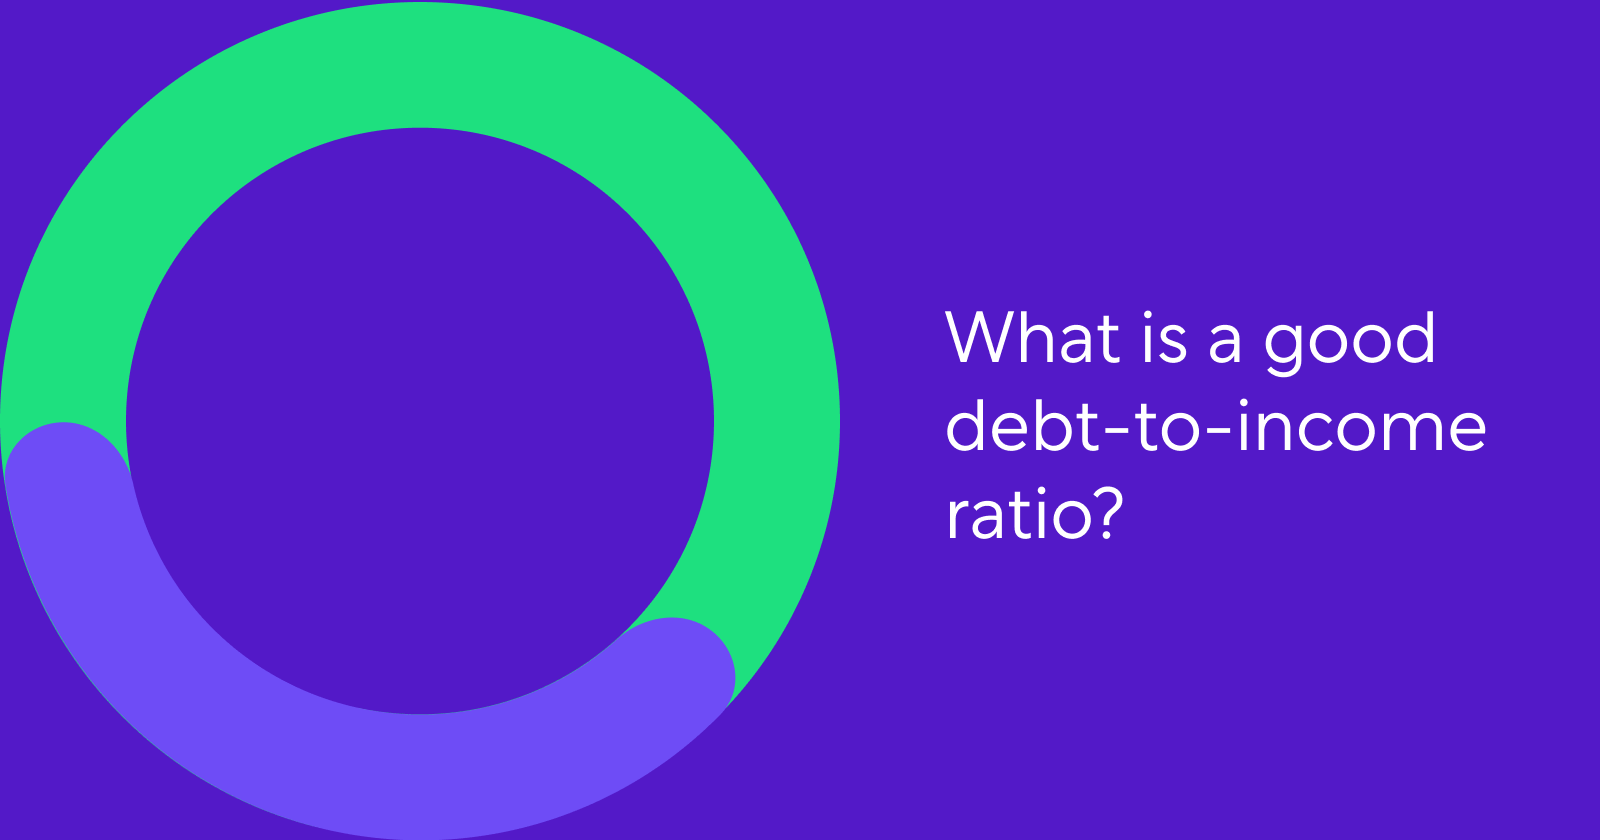 Purple Image with a Green and Lighter Purple Circle Within and Text That States: What is a Good Debt to Income Ratio?